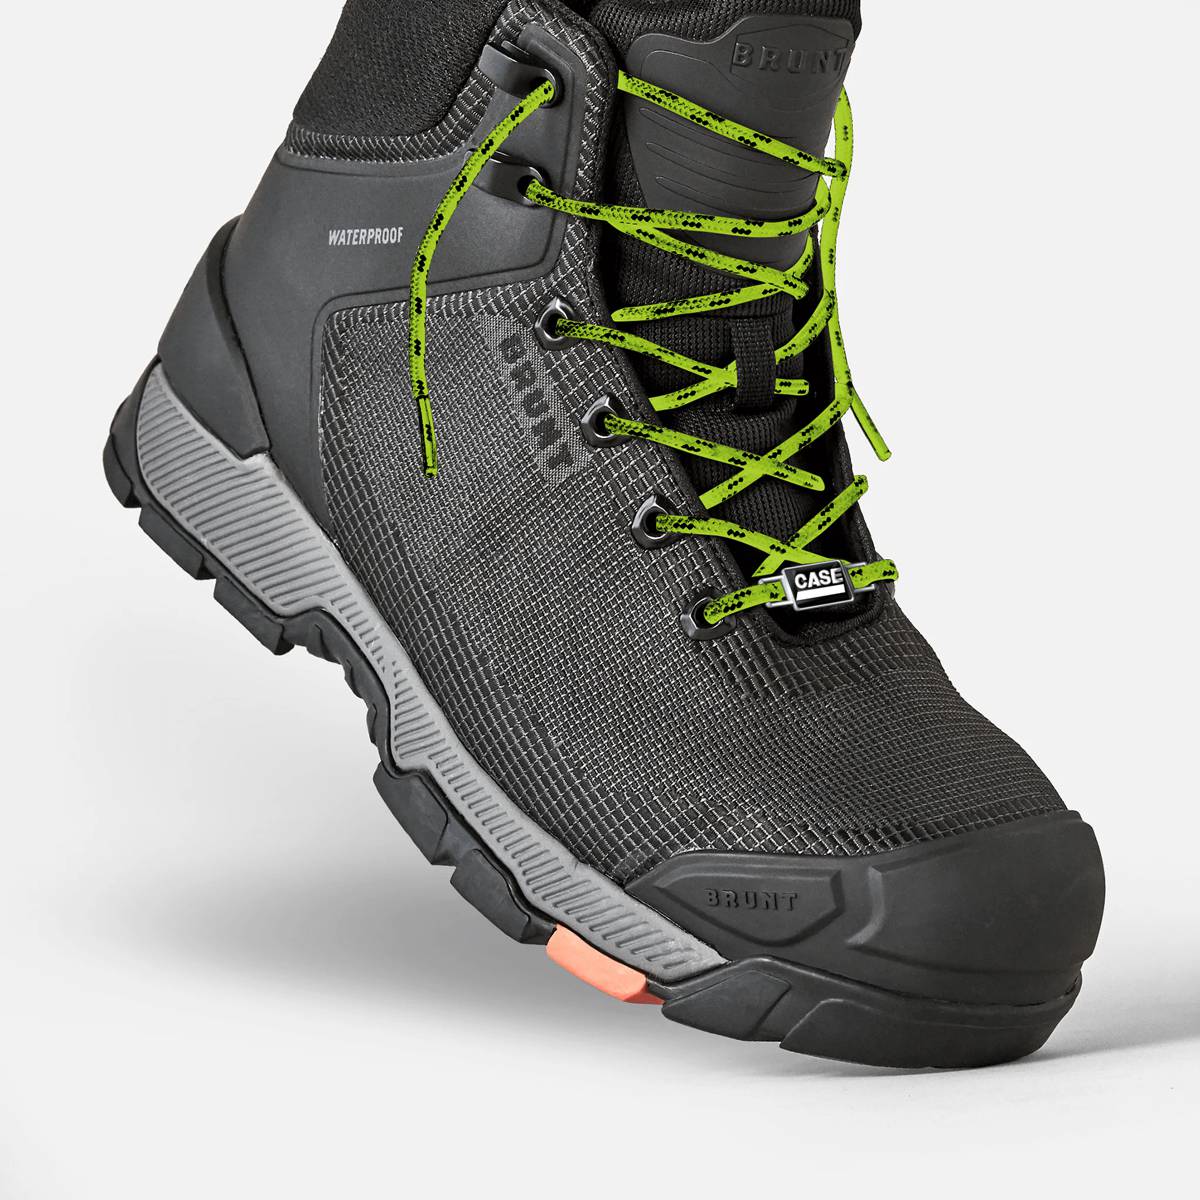 The Ultimate Operator Boot created by CASE and BRUNT Workwear